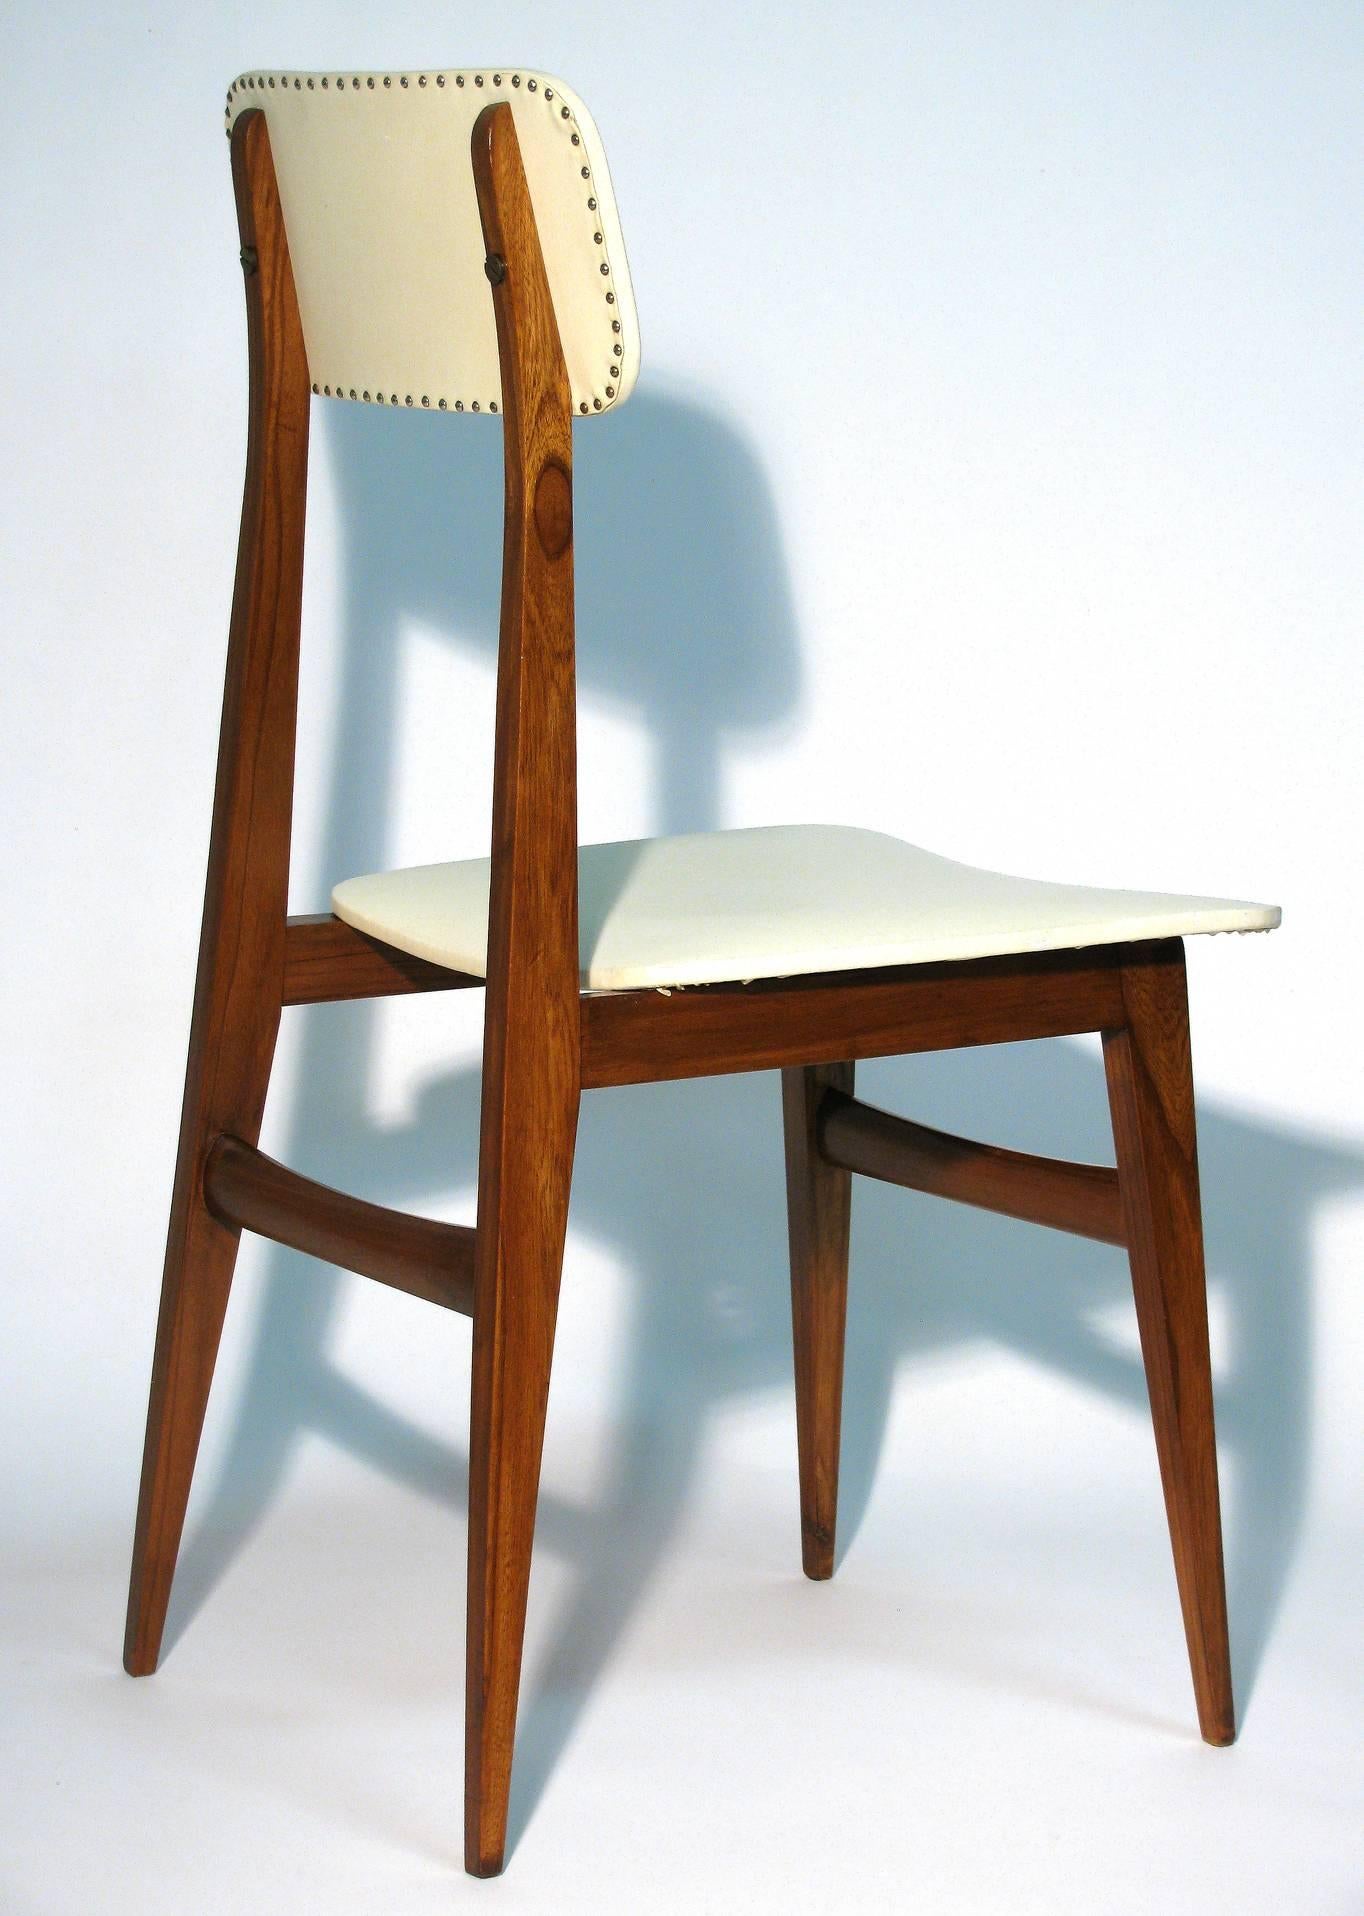 Italian modernist design side chair, in the manner of Gio Ponti, of walnut with original Lorica upholstery. The backrest features two large brass flat screws with nailhead trim along the edge.